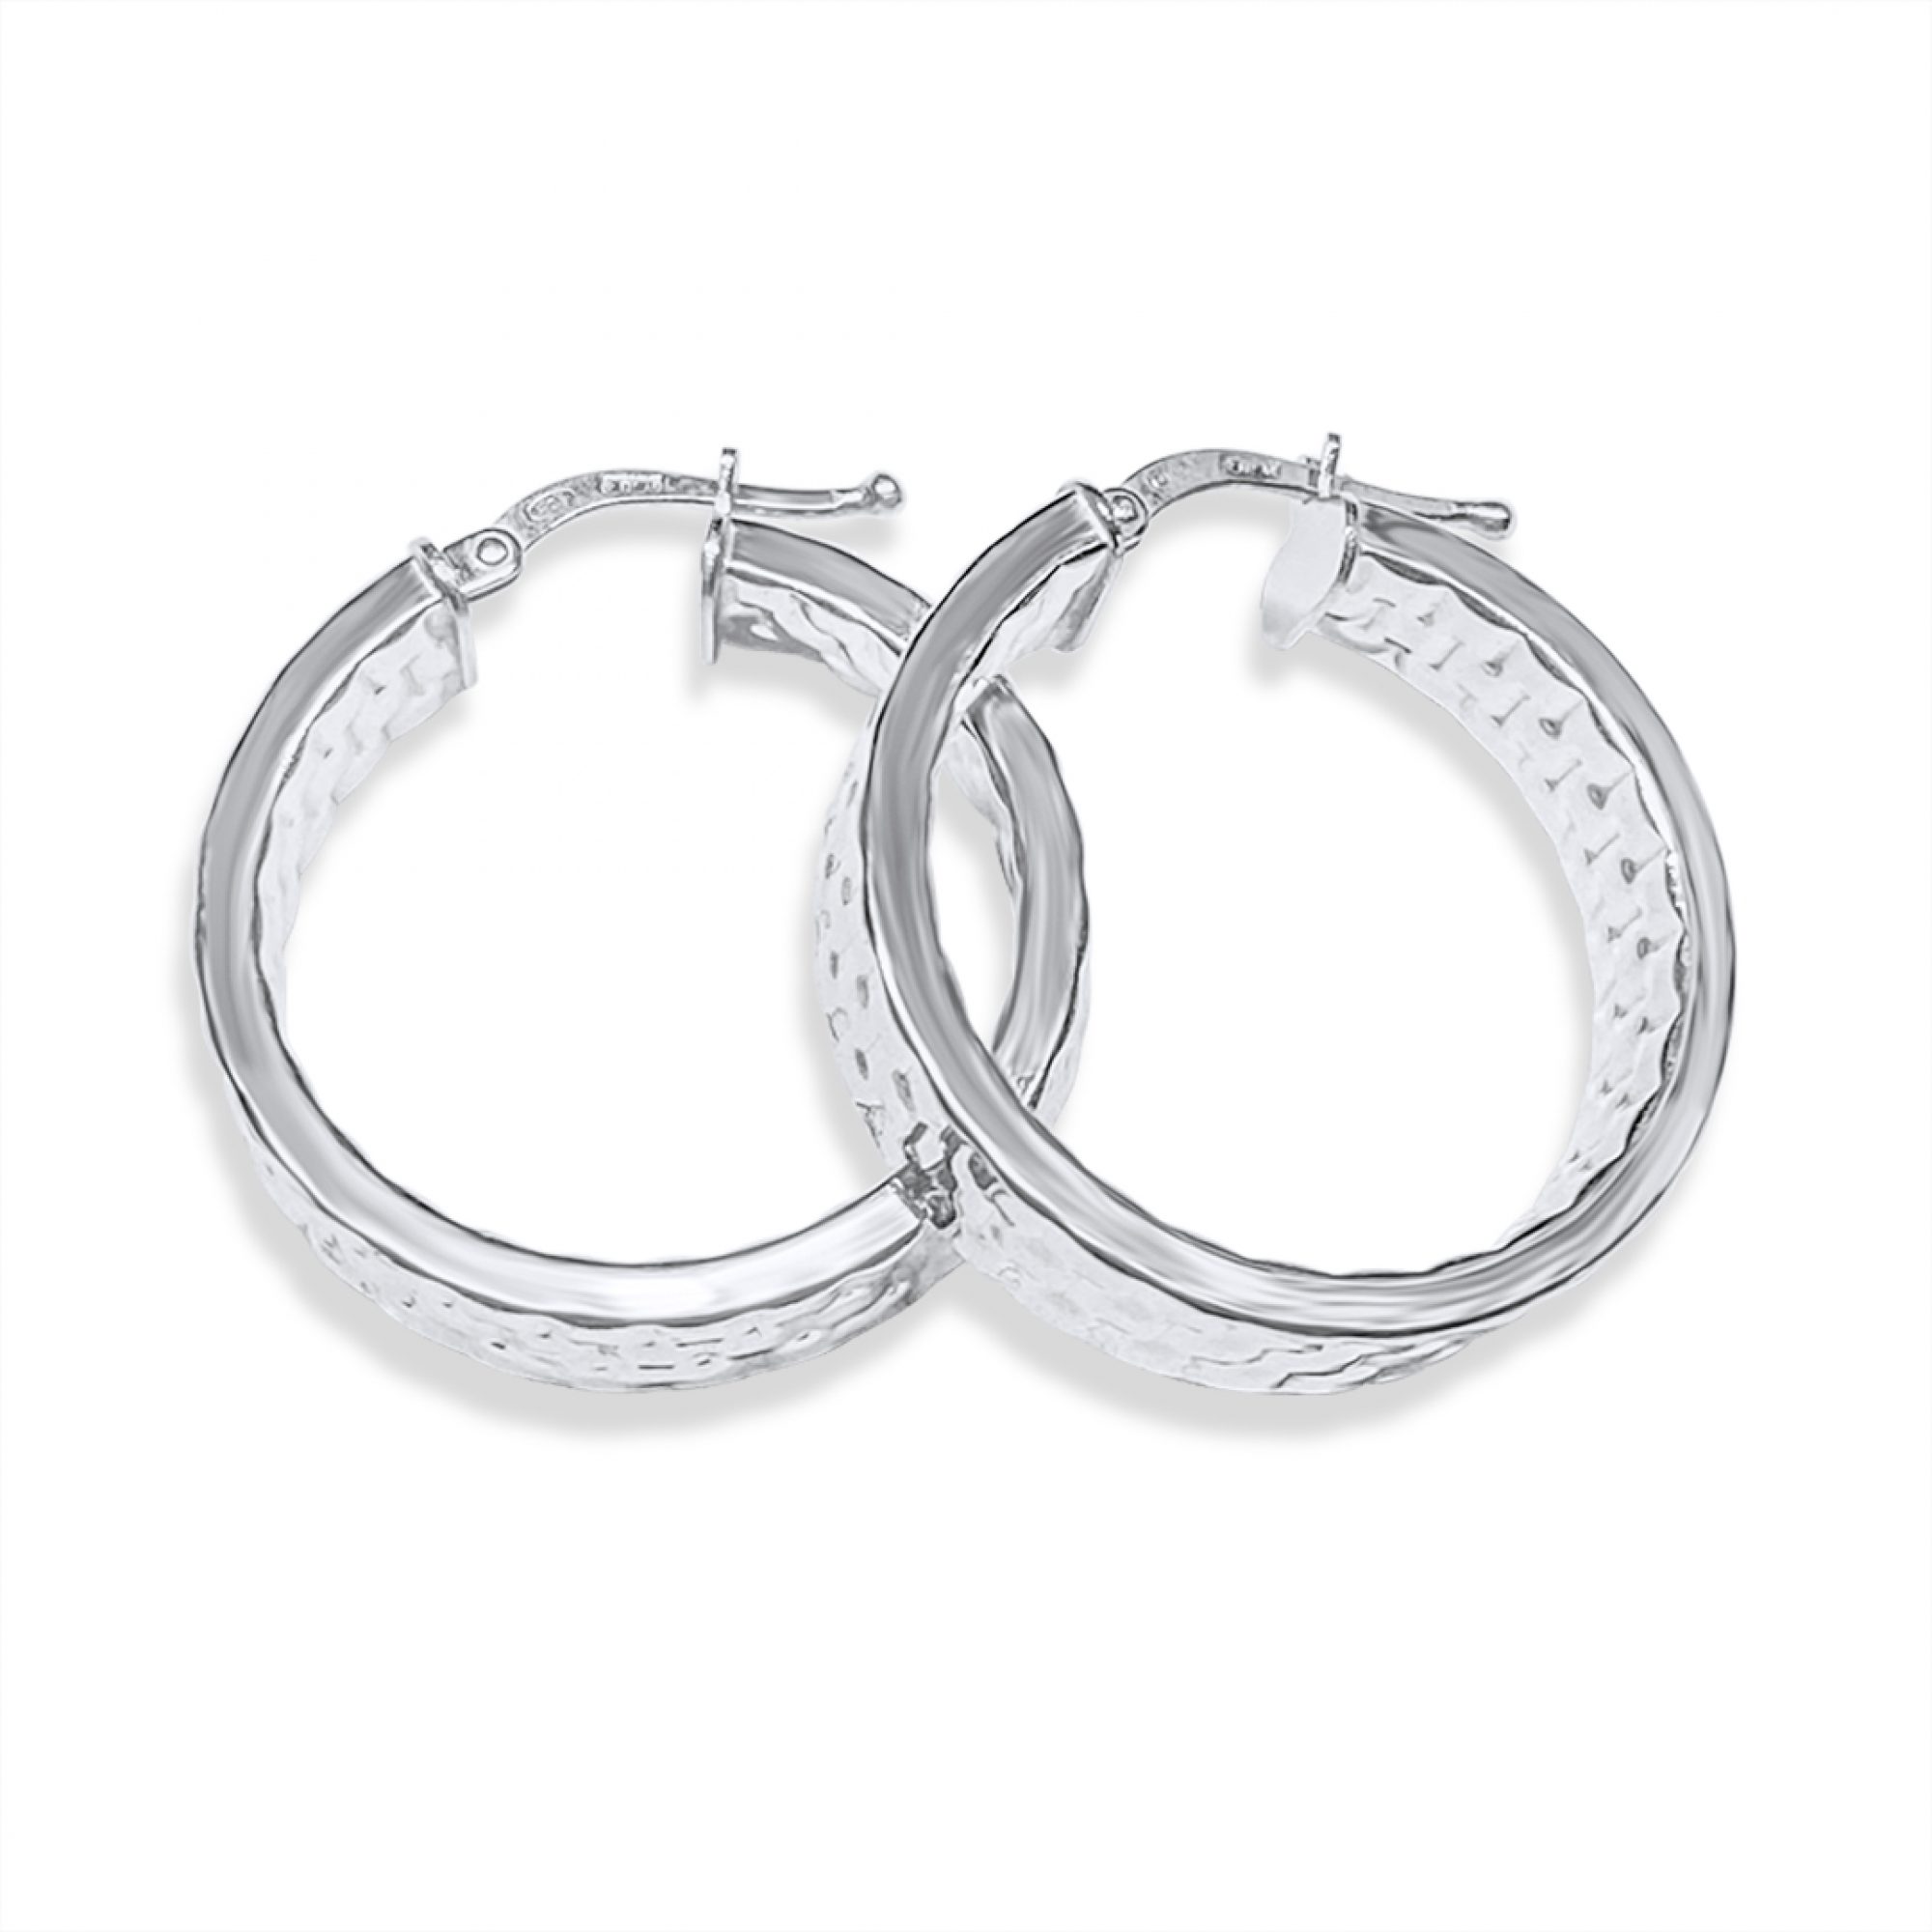 Silver wrought hoops (34mm)